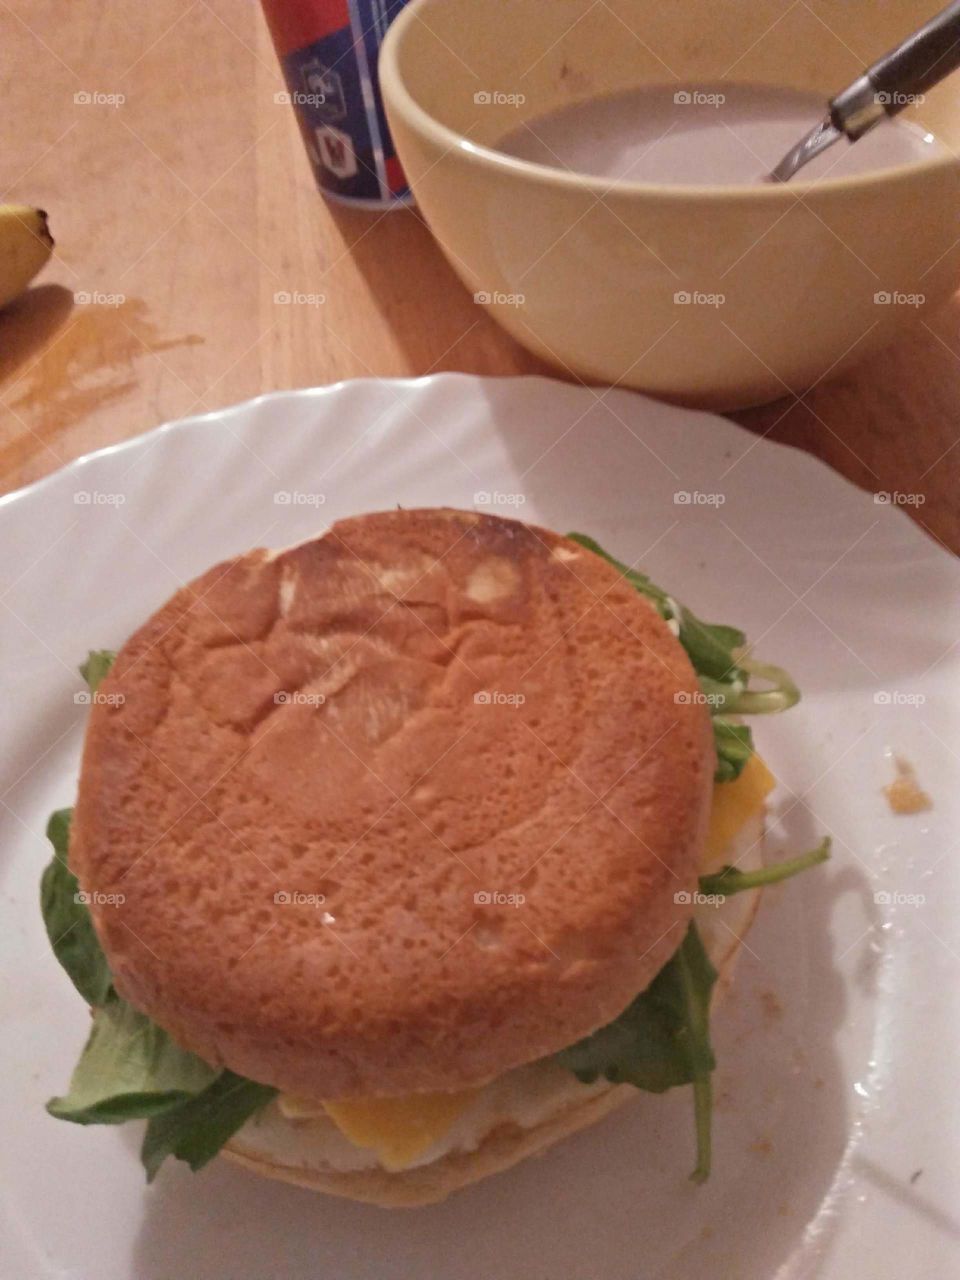 homemade burger with egg, cheese and jerjer leaves